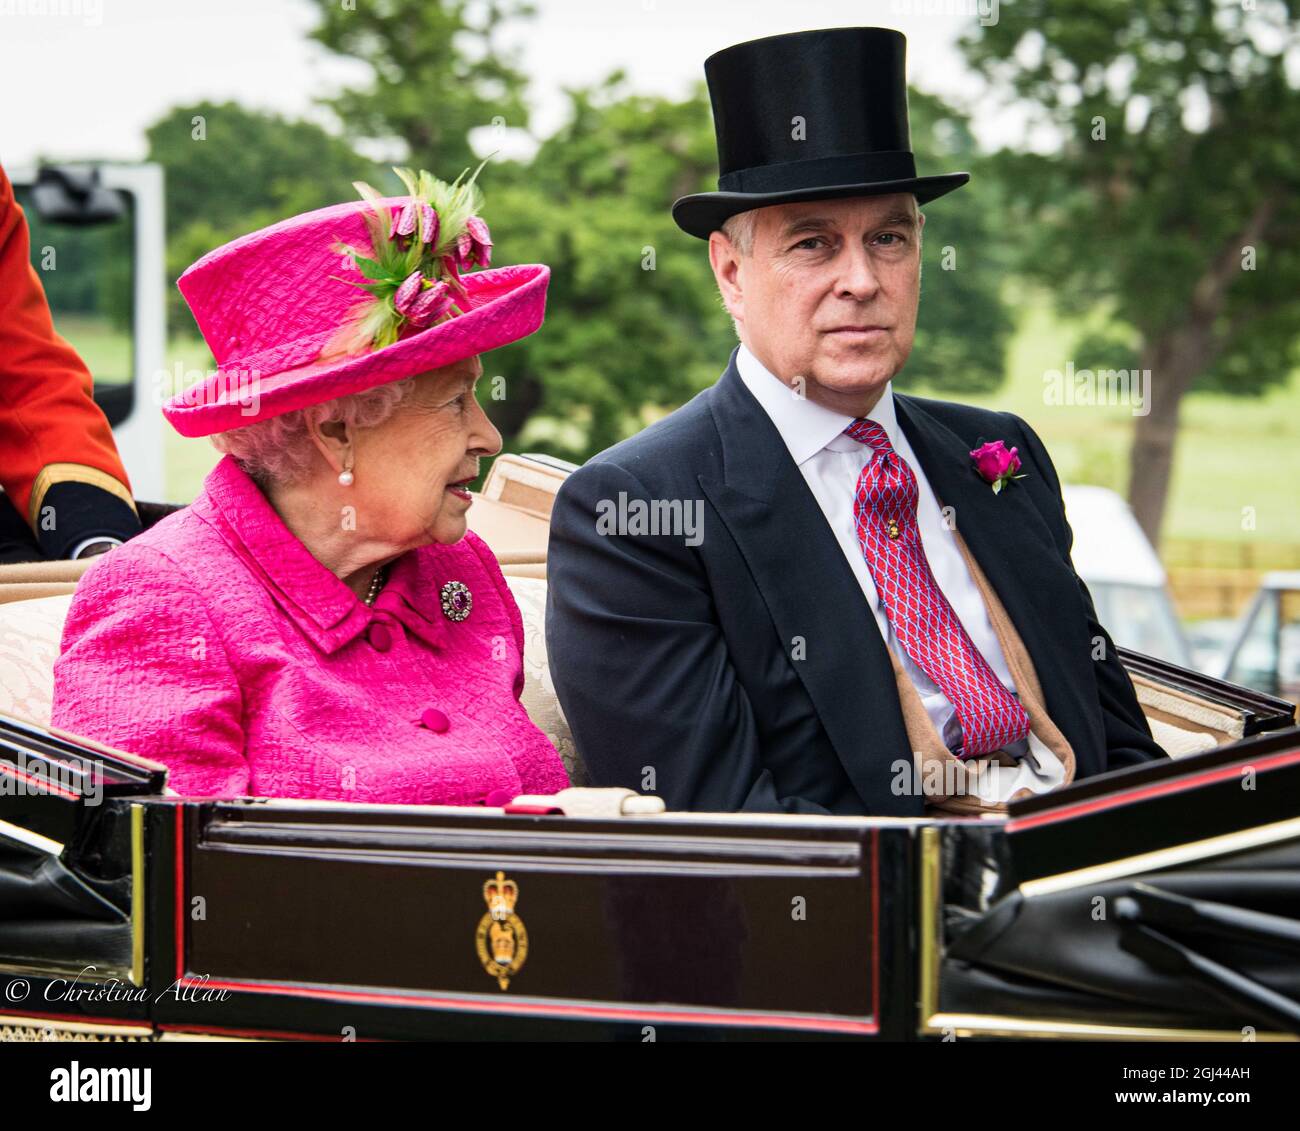 Windsor/England: June 22, 2017: Her Majesty Queen Elizabeth and son Prince Andrew, Duke of York, head to Royal Ascot in a landau carriage Stock Photo